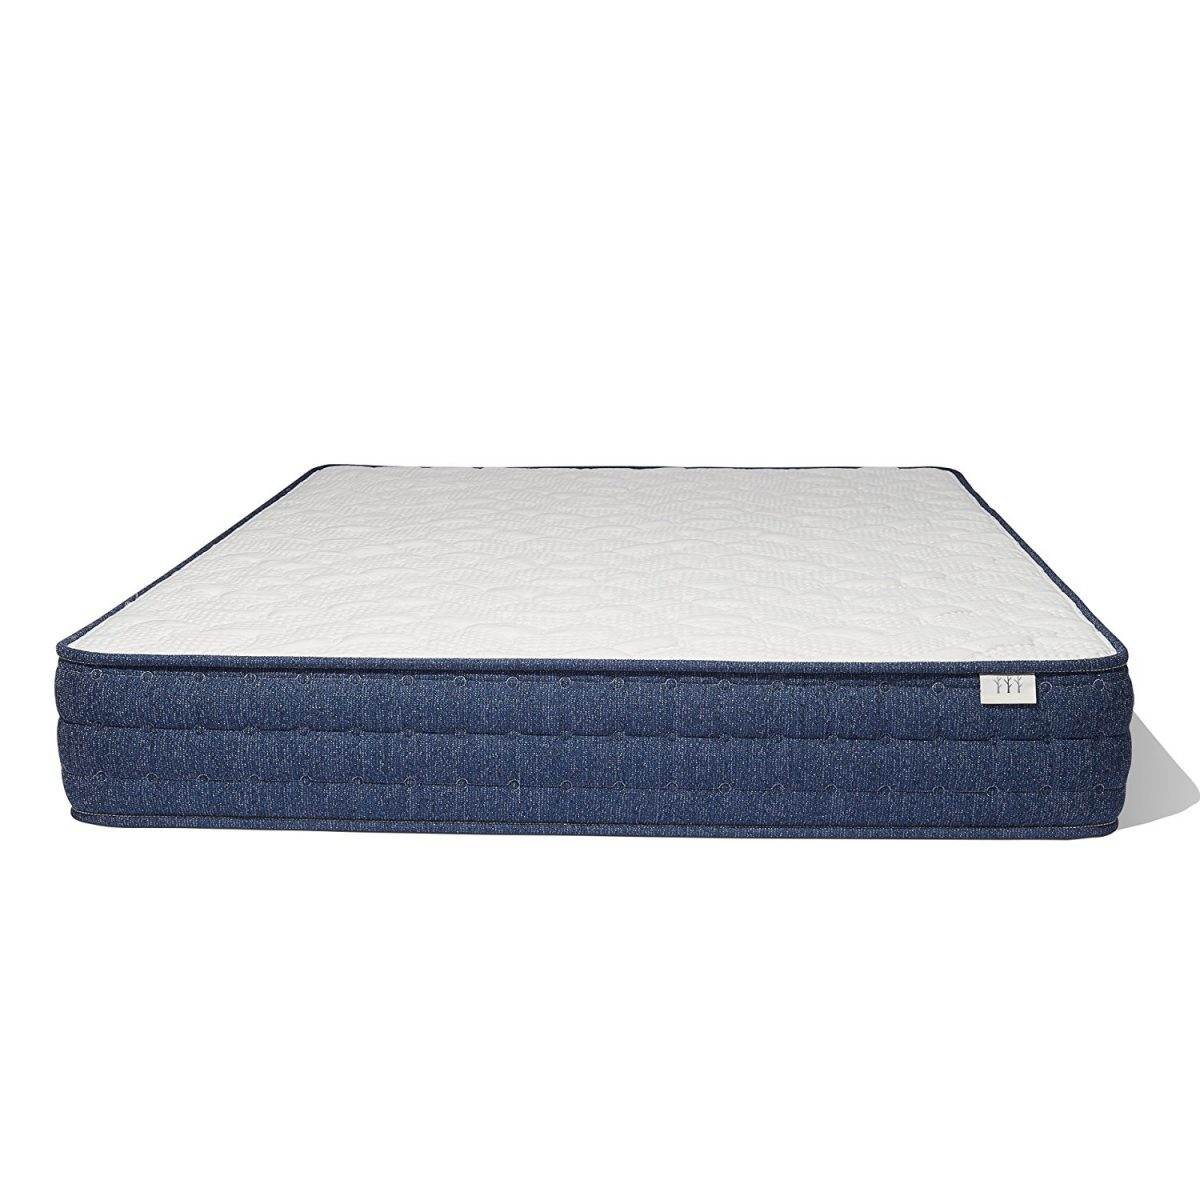 The Brentwood Home Avalon Wrapped Innerspring Mattress